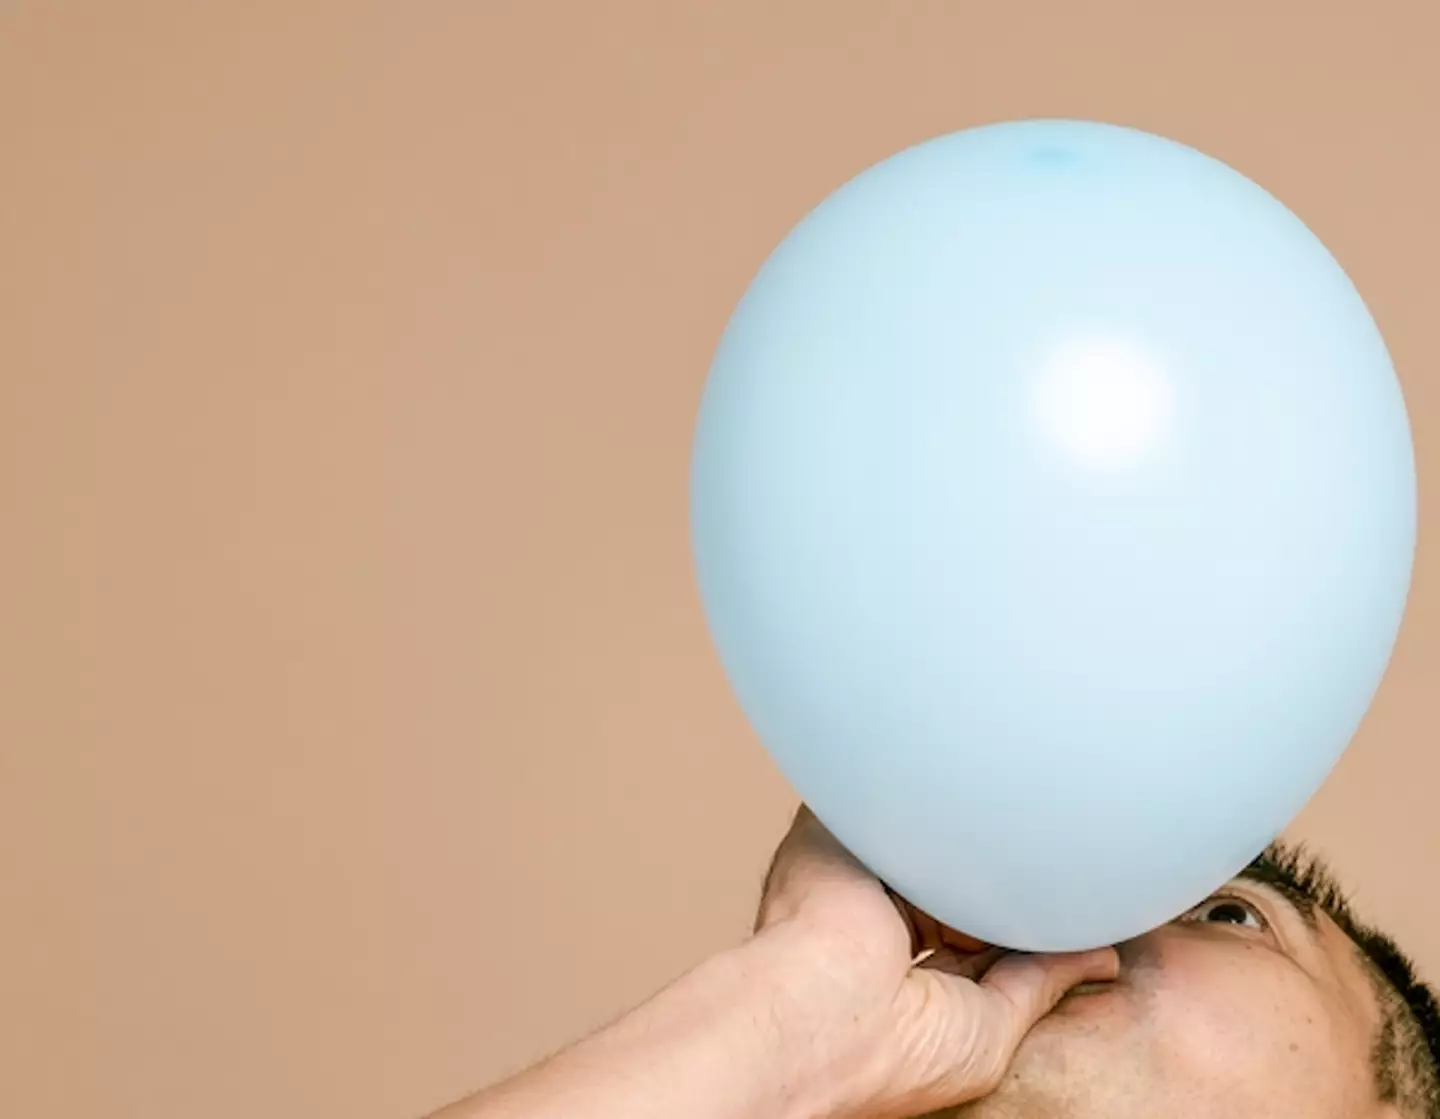 Nitrous oxide can be inhaled through balloons.